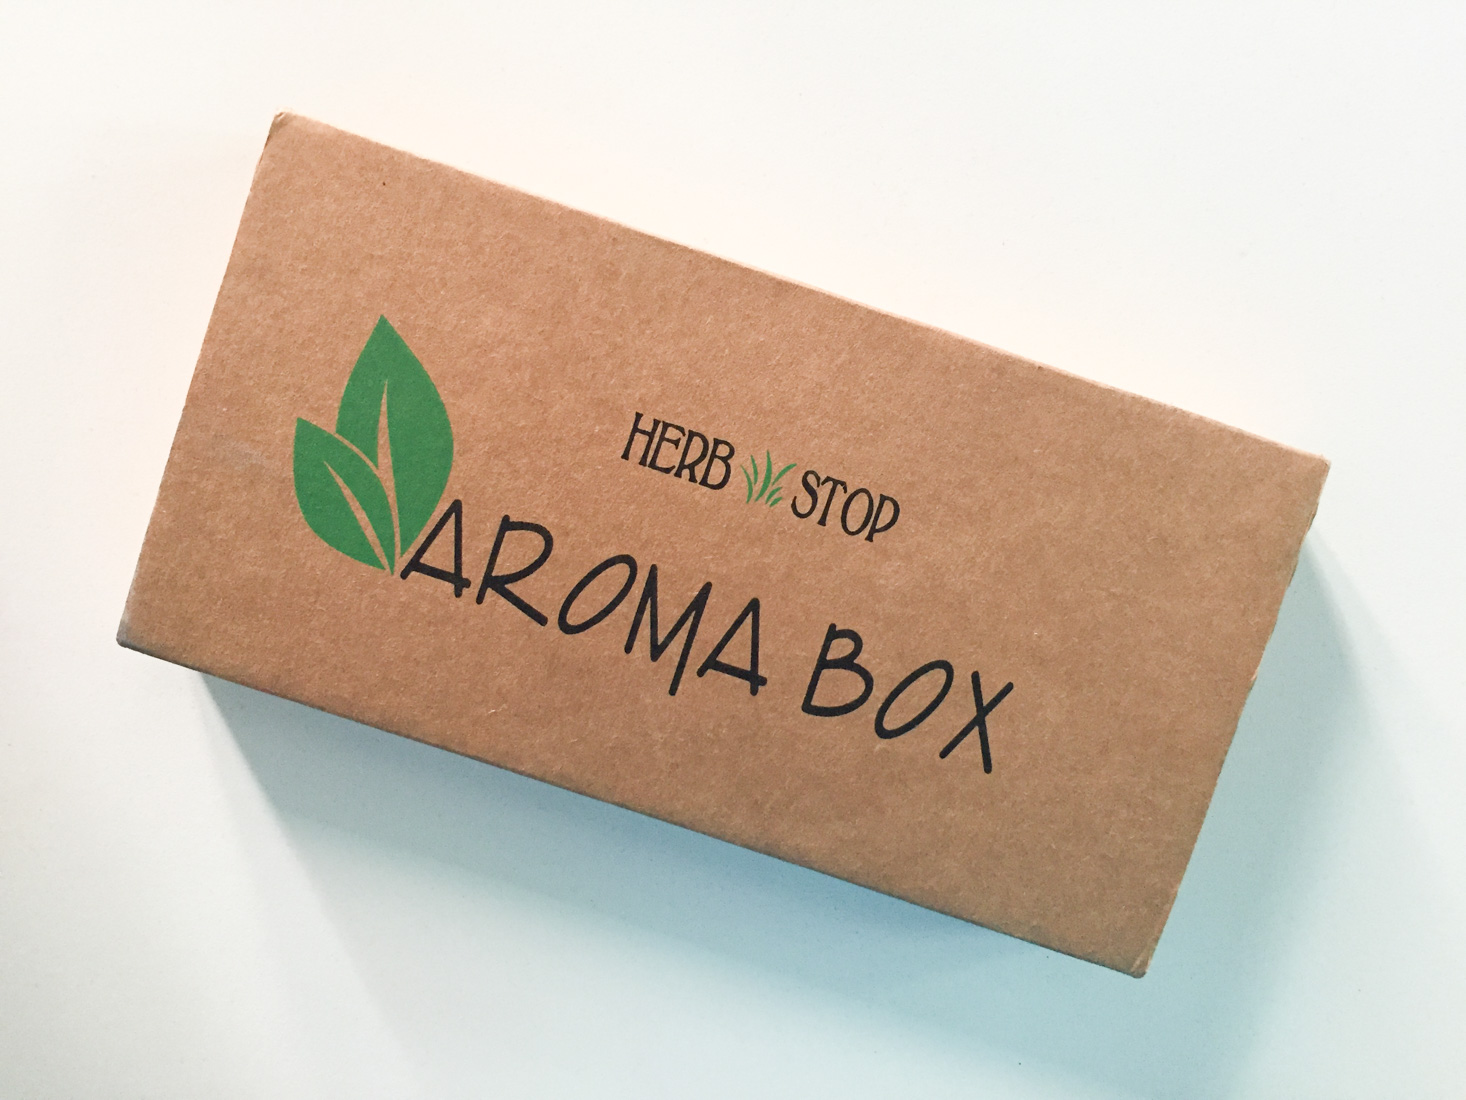 AromaBox Essential Oil Box Review + Coupon – October 2018